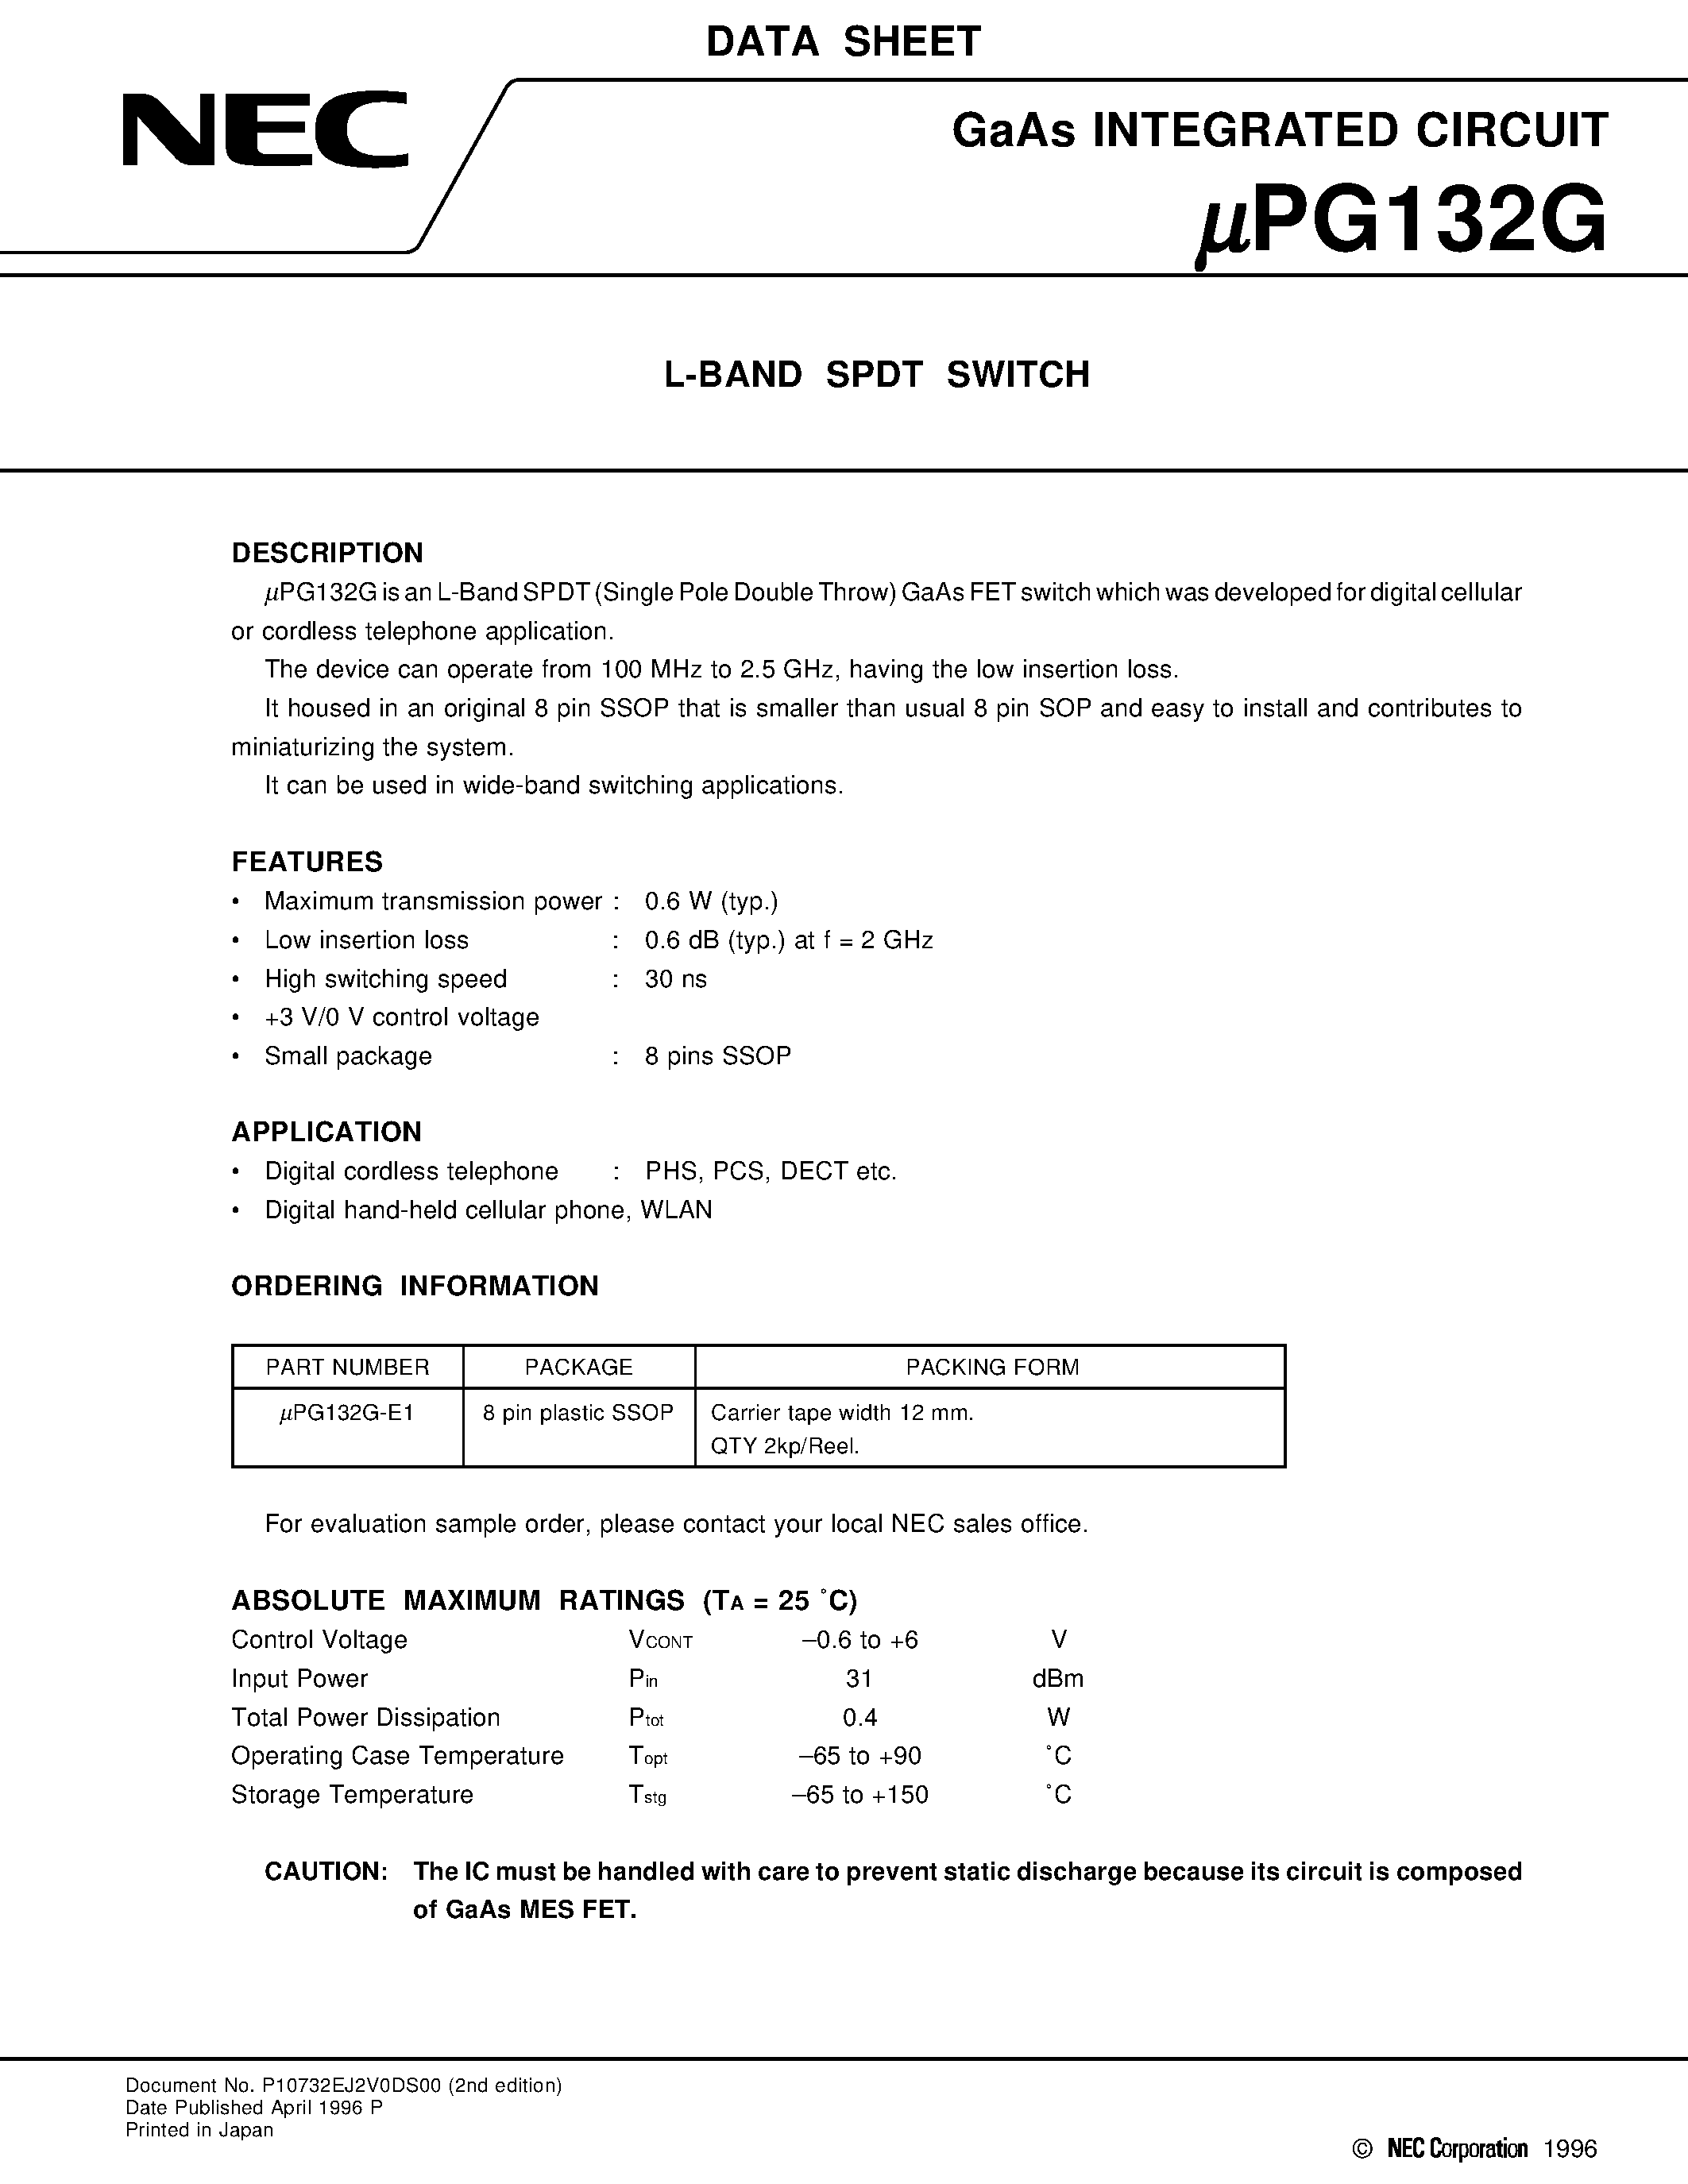 Datasheet UPG132G-E1 - L-BAND SPDT SWITCH page 1